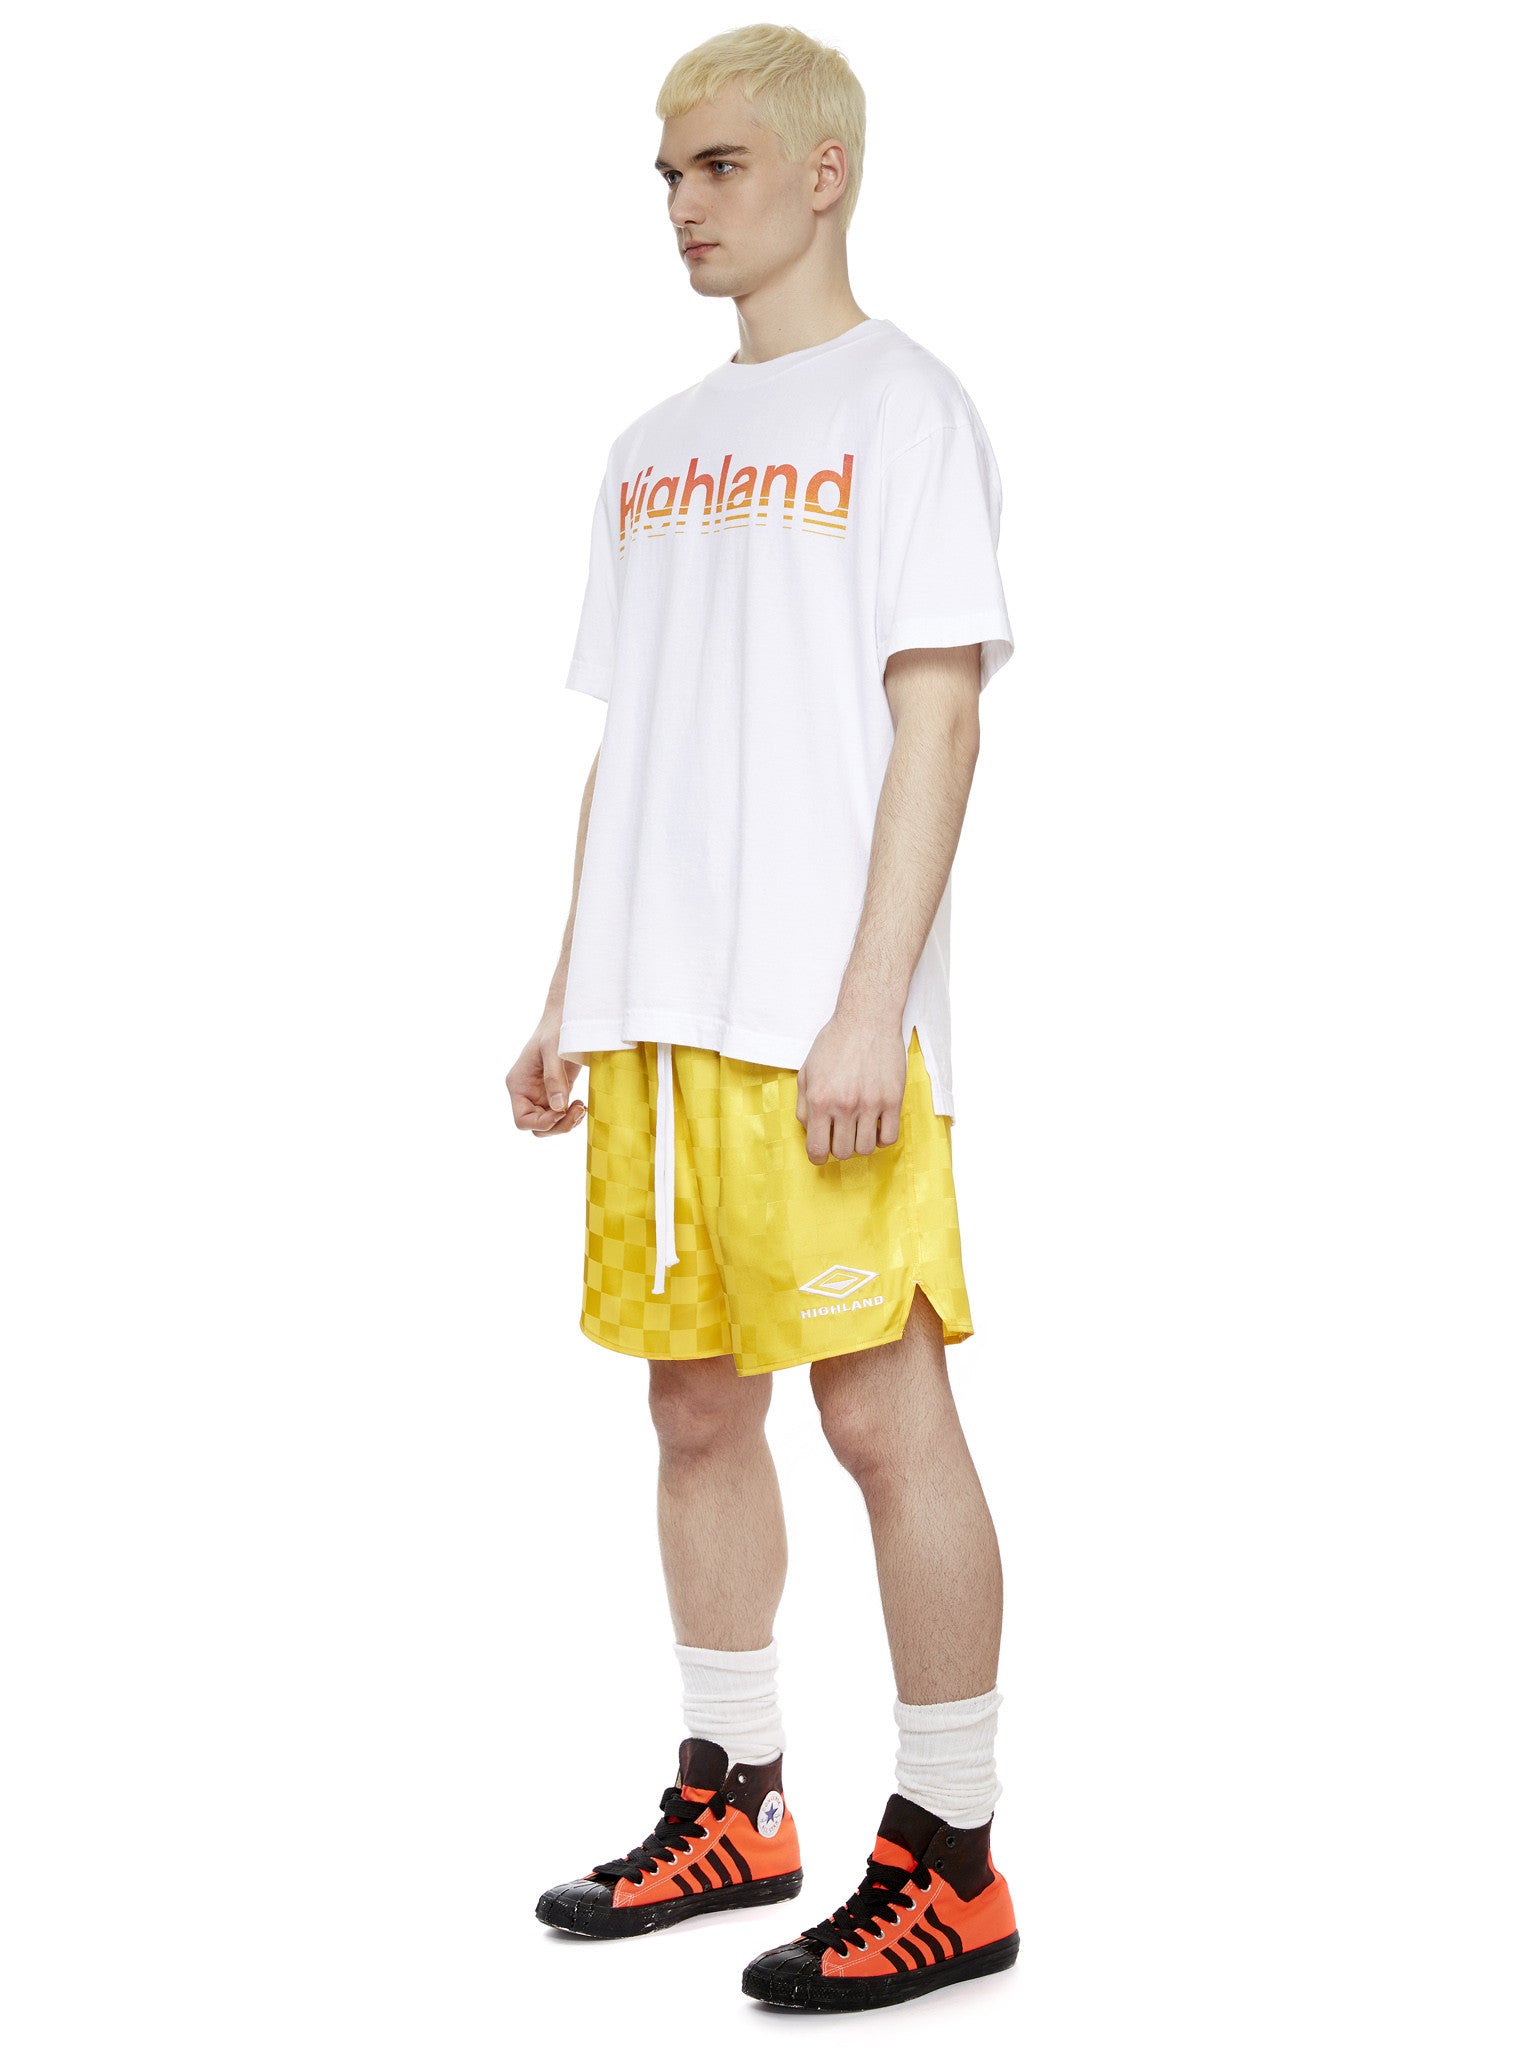 S/S Logo T-Shirt in White/Flame Gradient